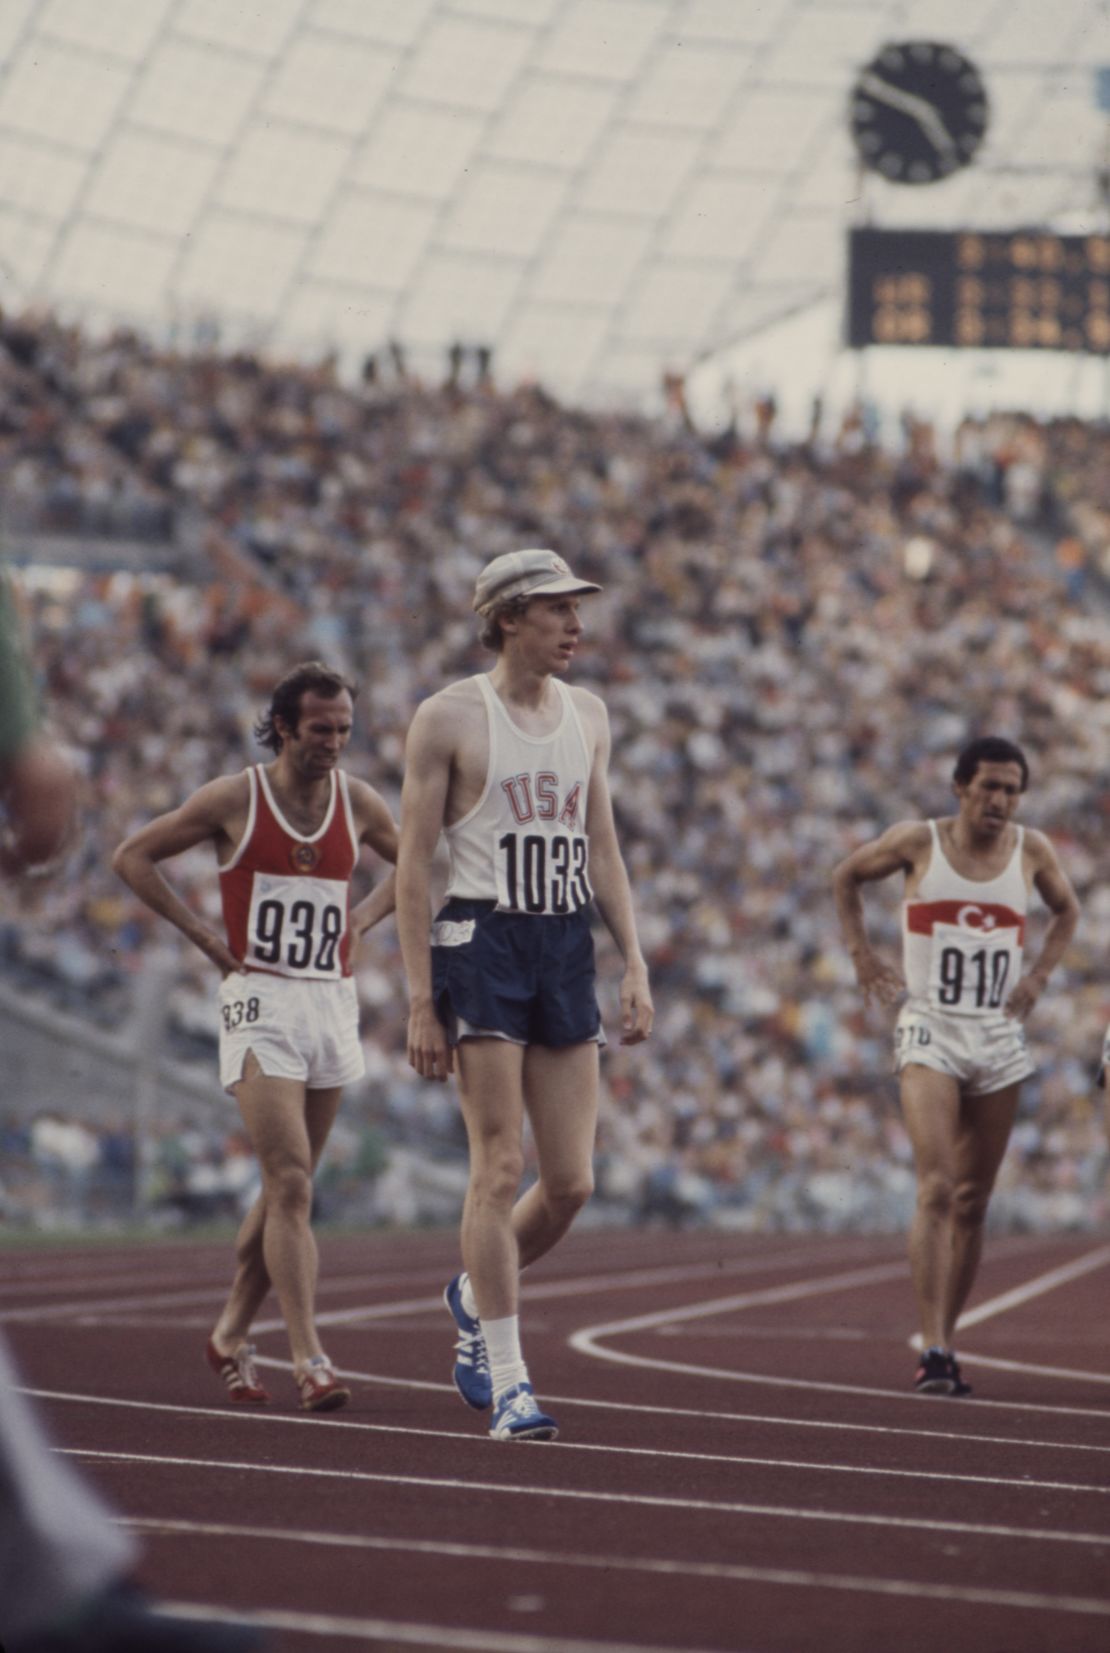 Wottle prepares to compete in the 1,500m at the Munich Olympics. 